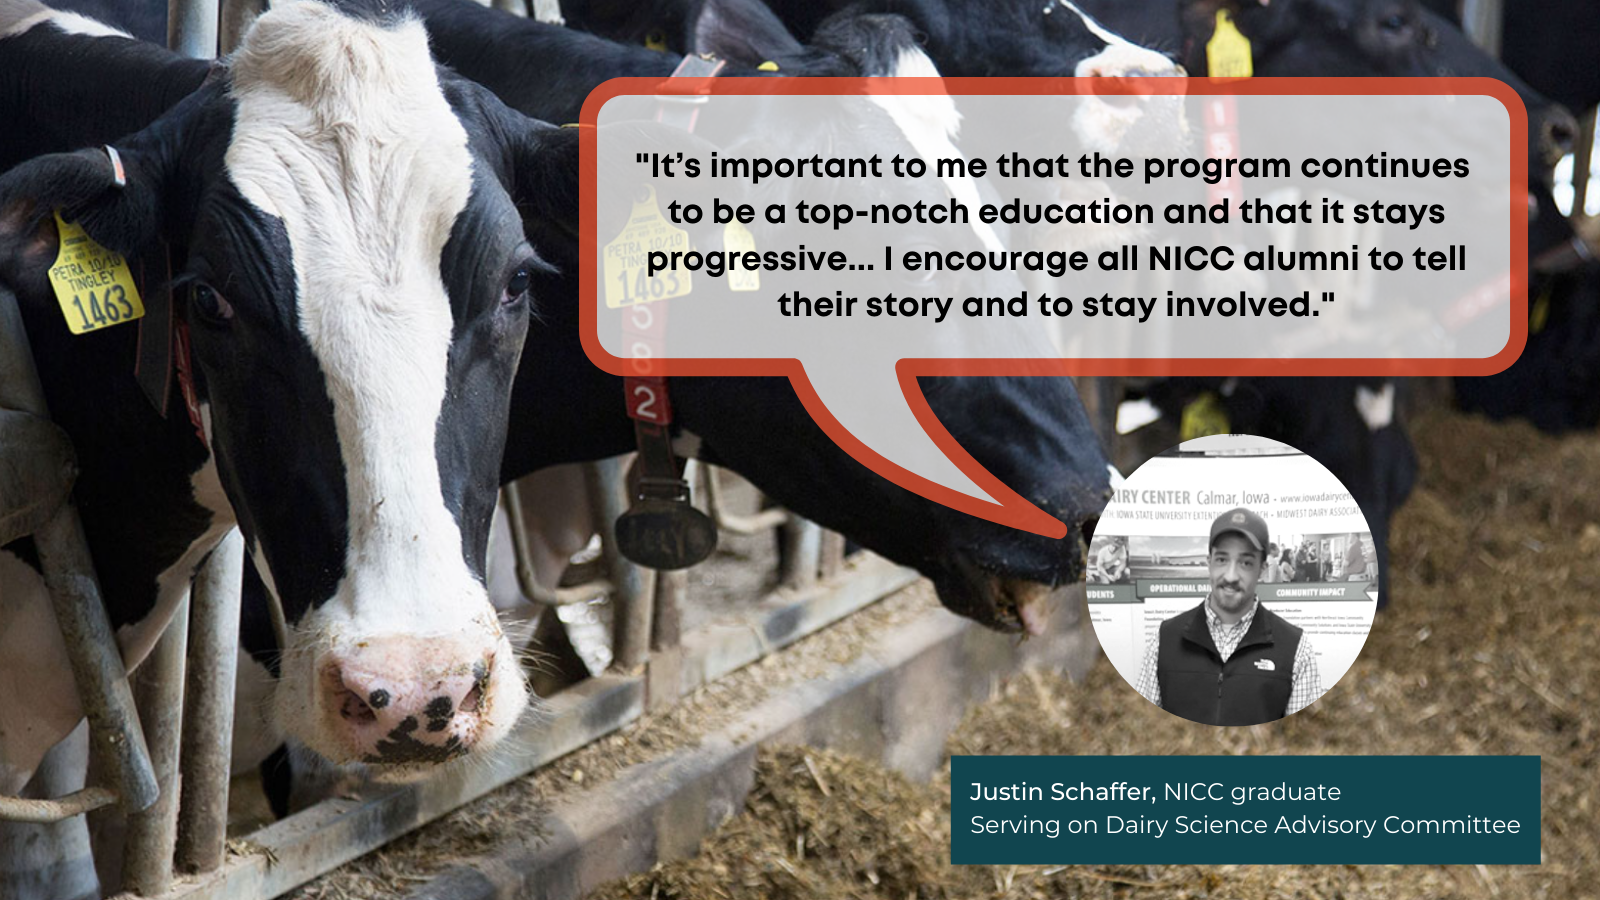 Dairy cows are in the background. The text reads: "It's important to me that the program continues to be ea top-notch education and that it stays progressive...I encourage all NICC alumni to tell their story and to stay involved/" Justin Schaffer, NICC graduate Serving on Dairy Science Advisory Committee